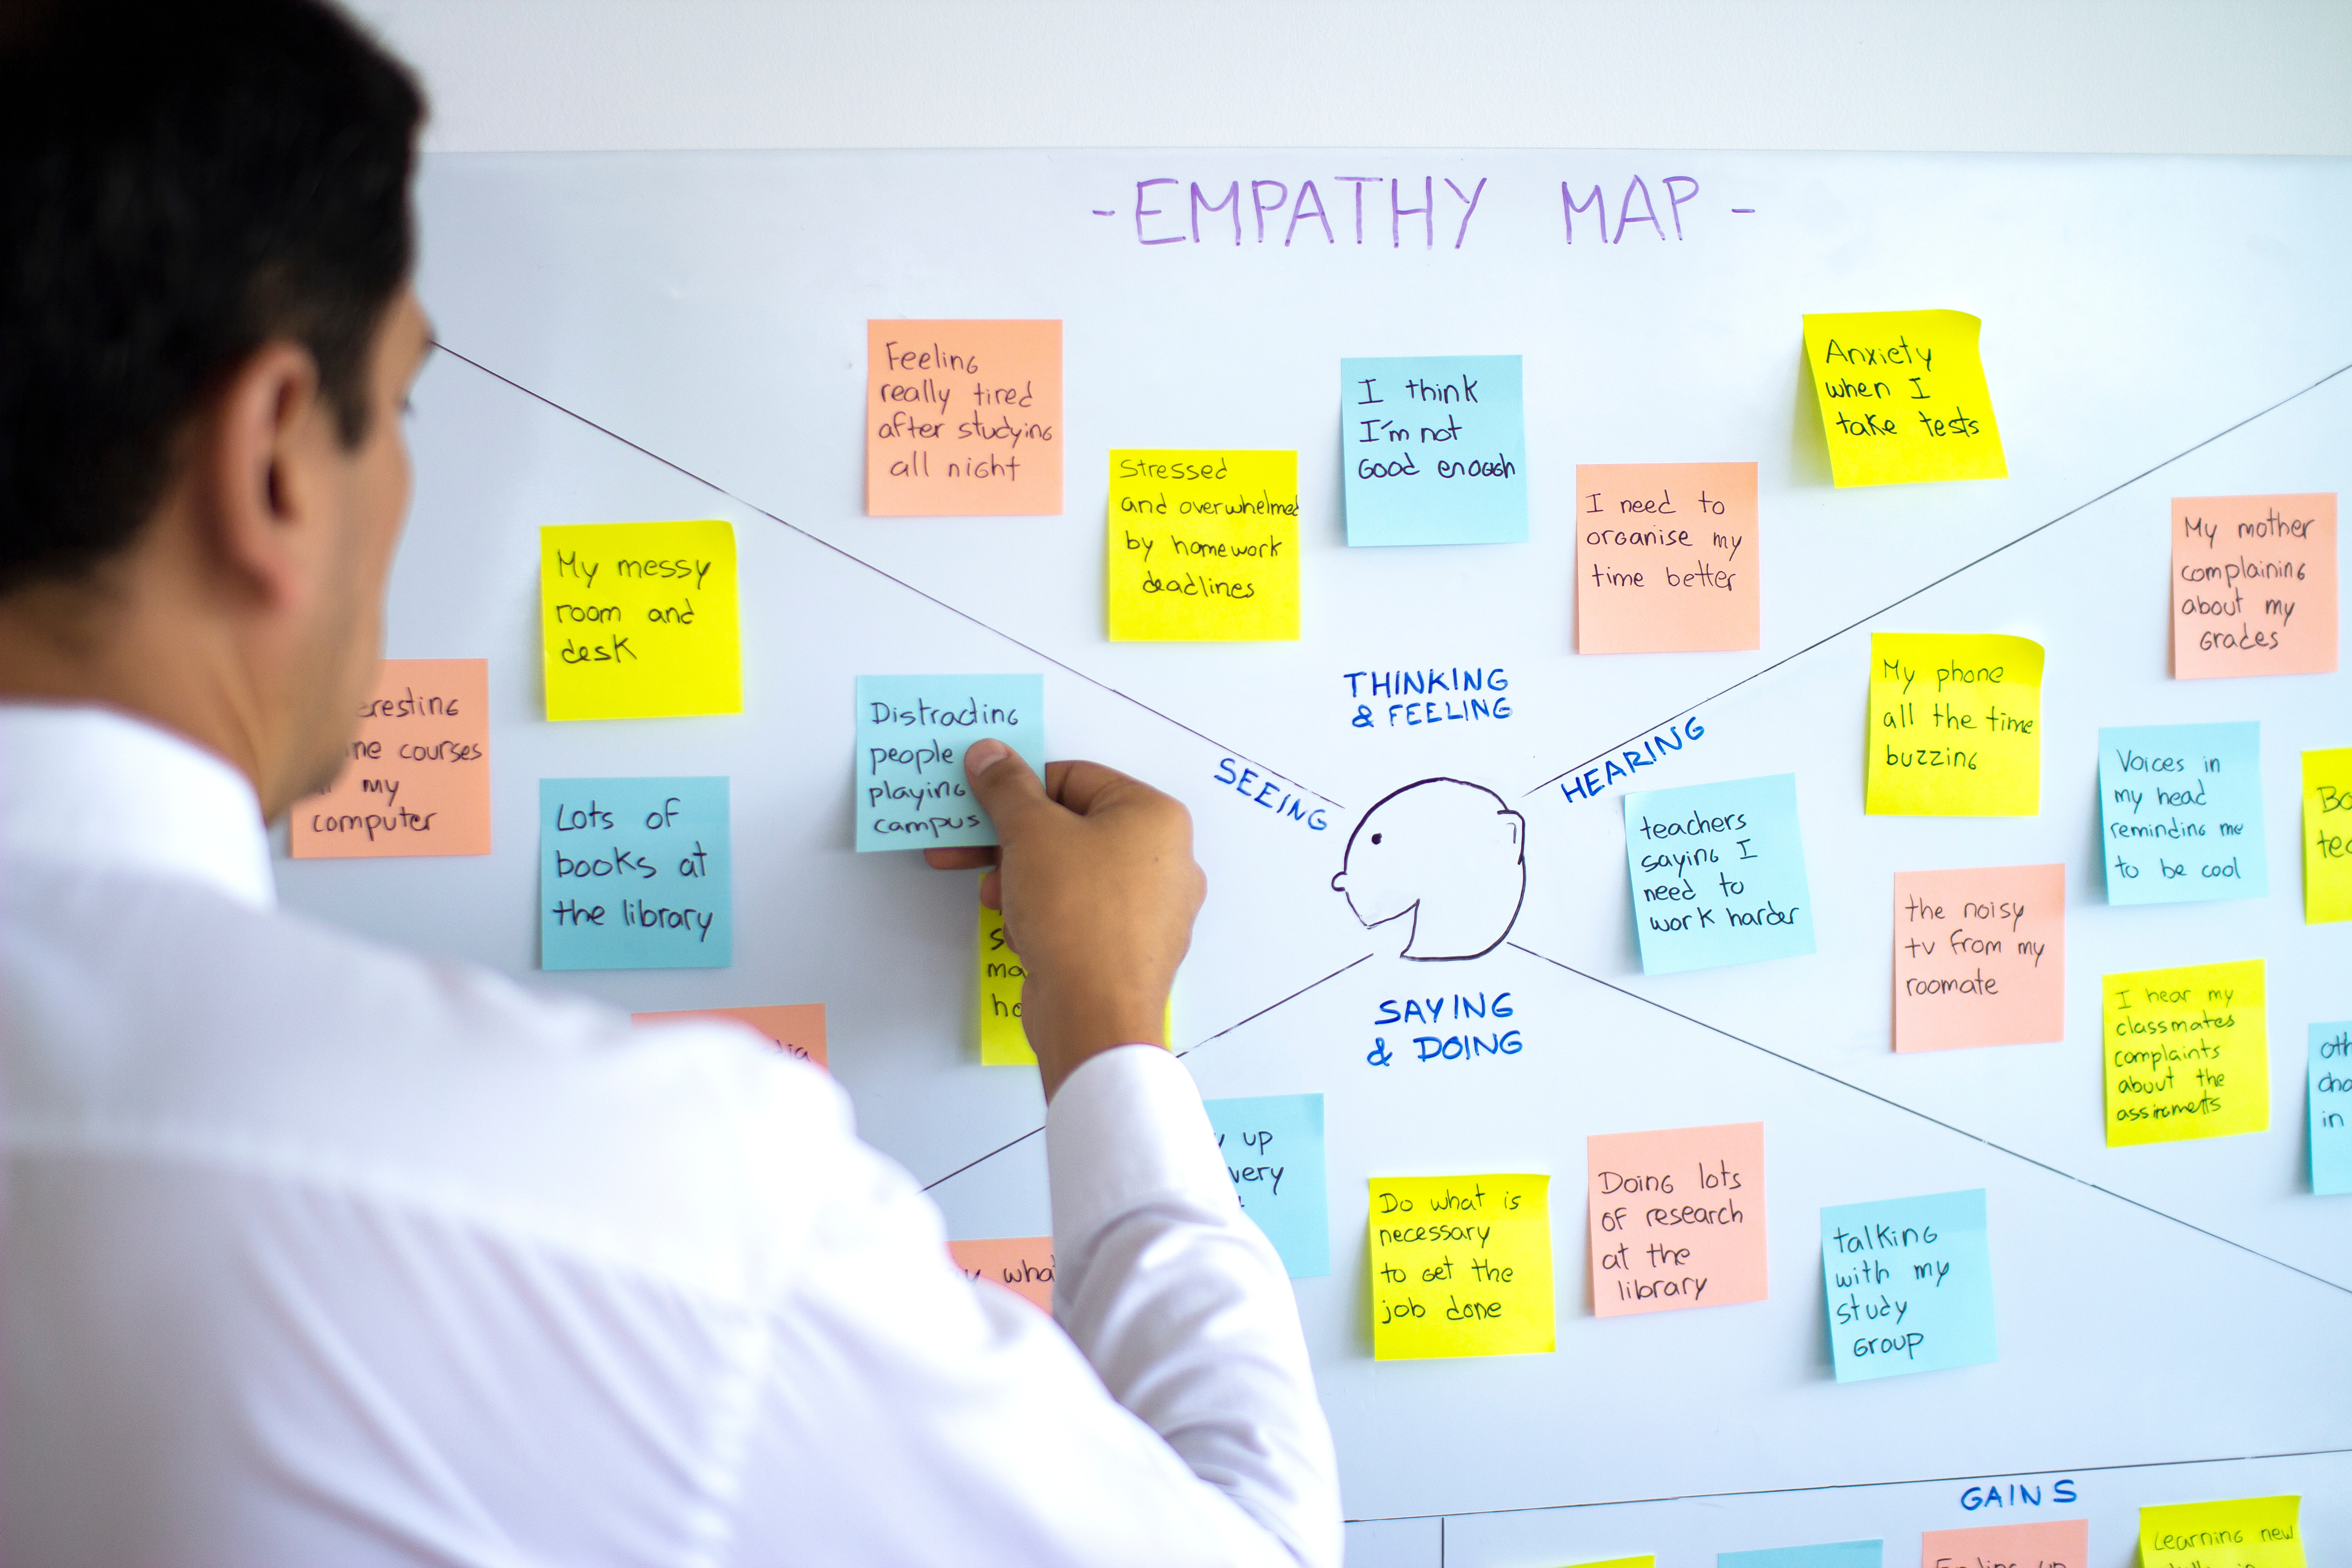 A sample empathy map with action points for thinking, hearing, seeing and saying